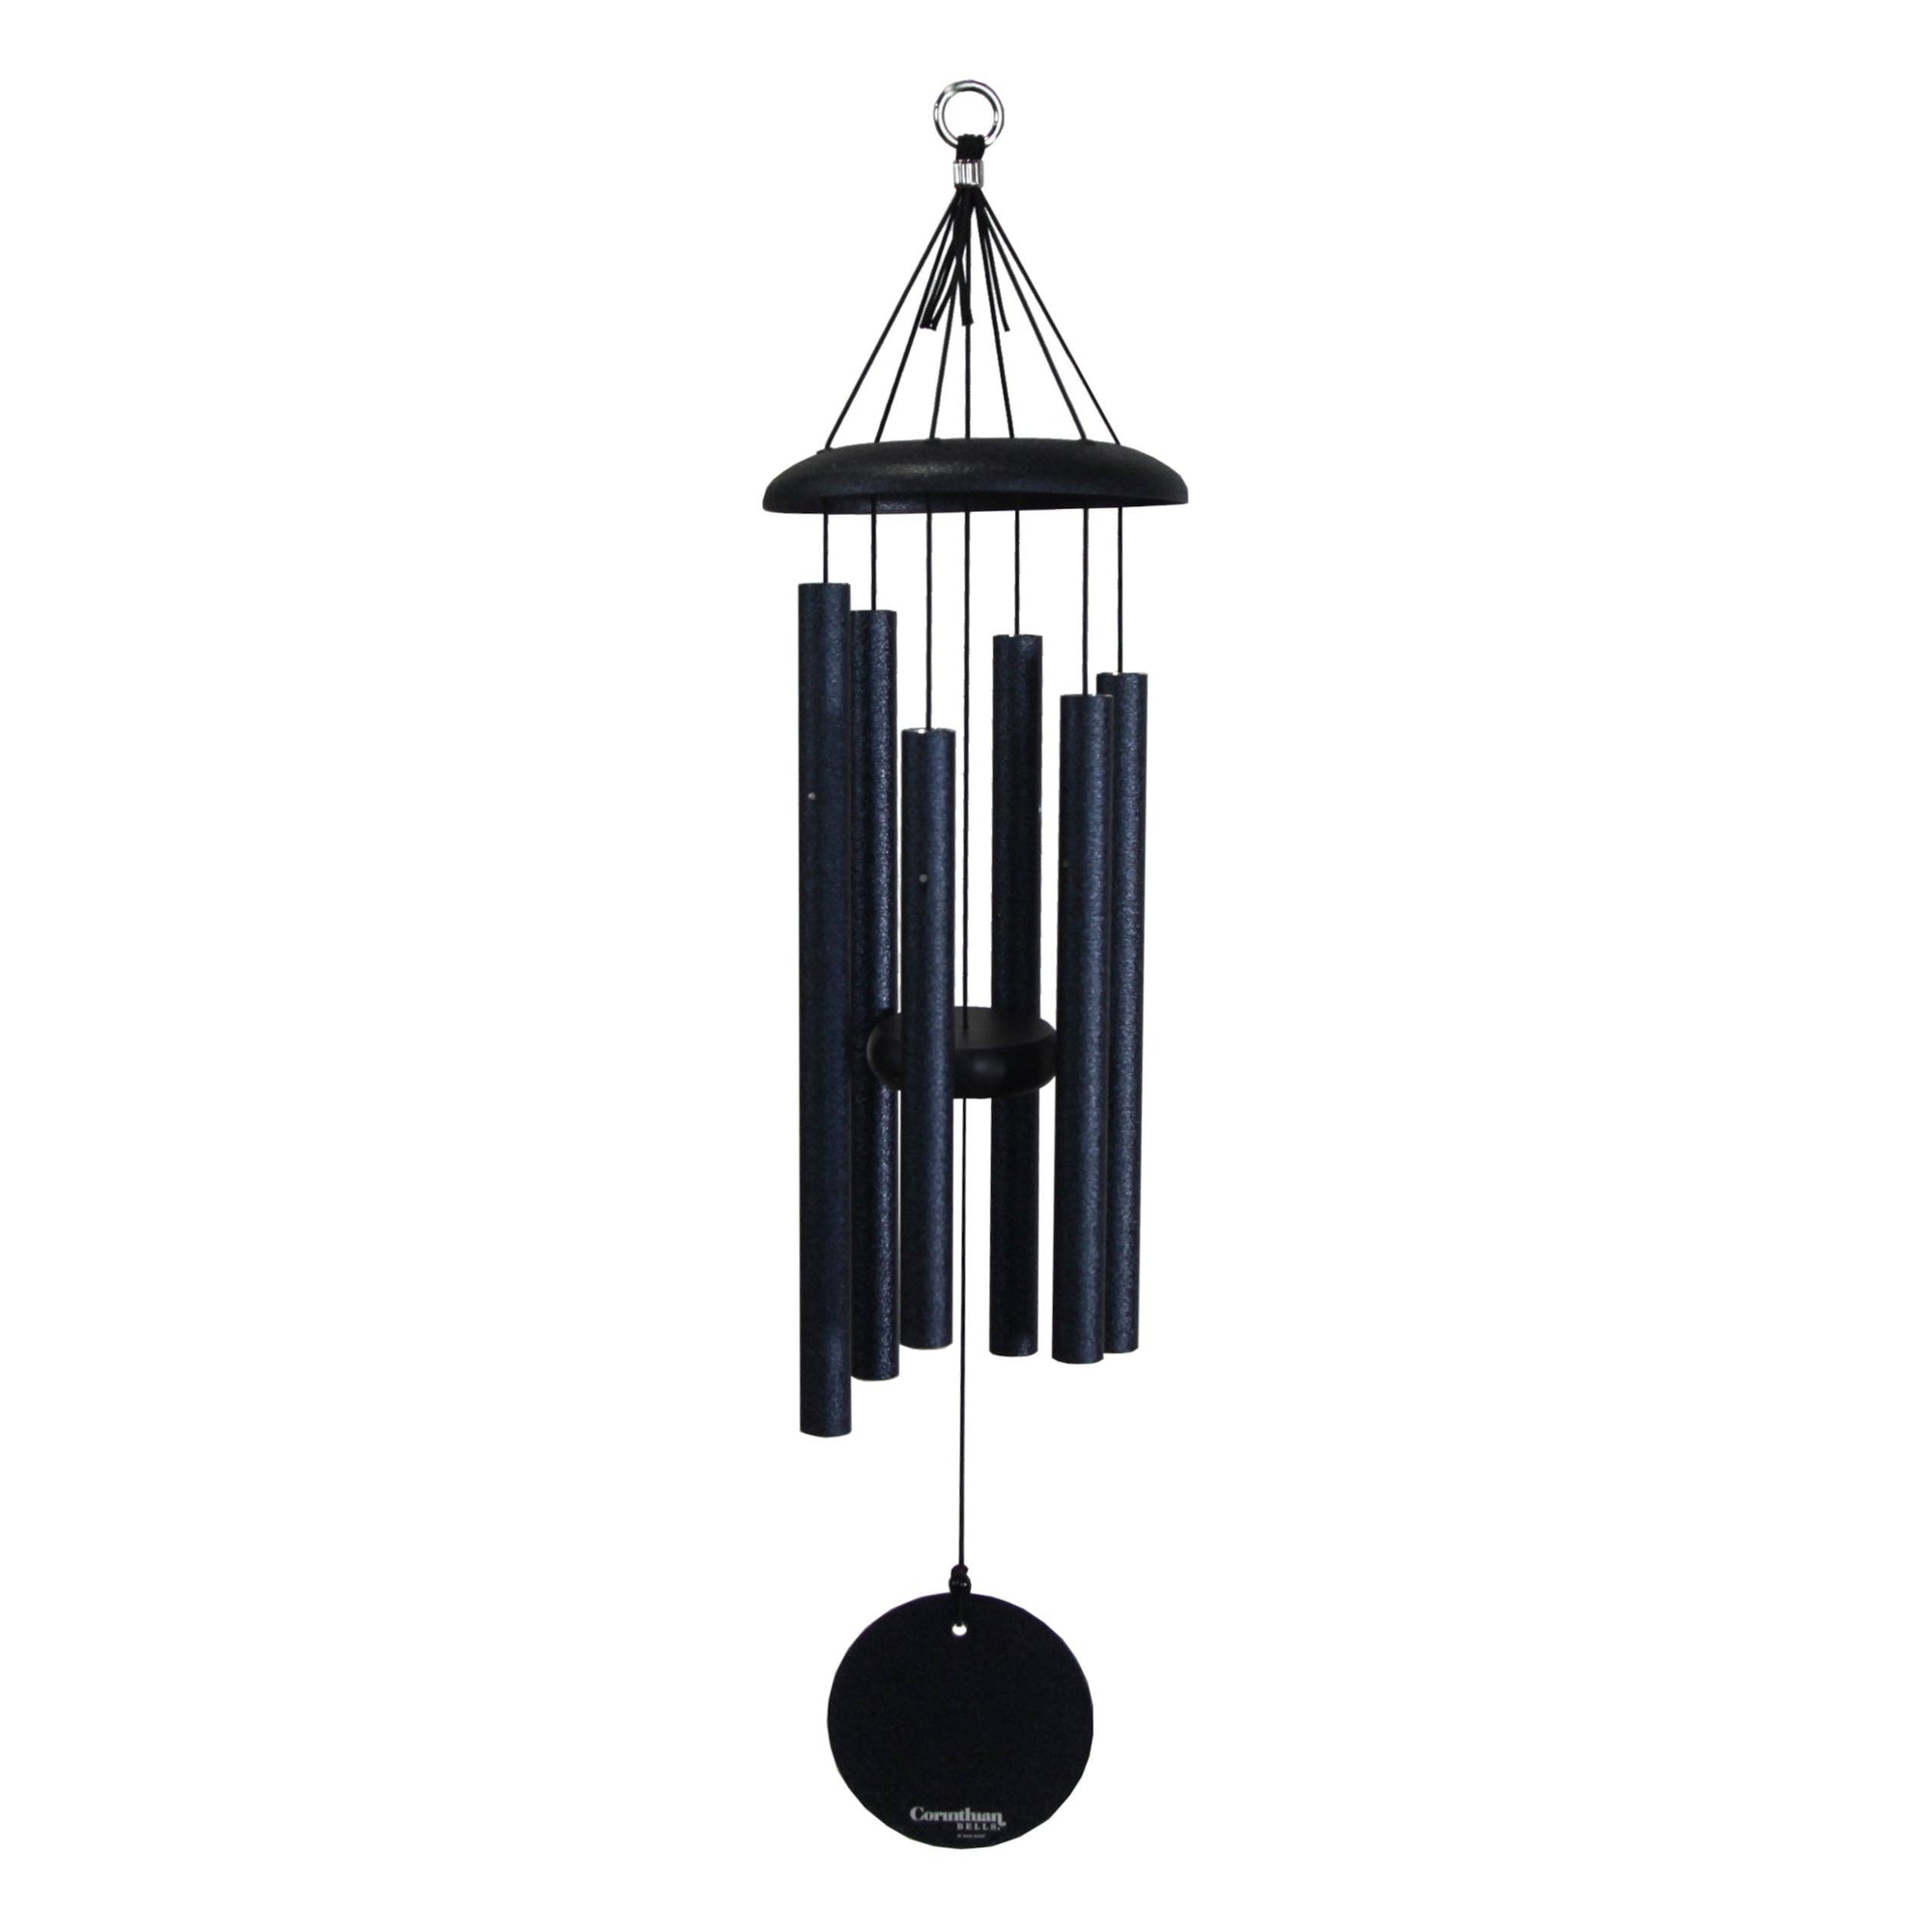 A budget-friendly 27" Windchime Corinthian Bells®, perfect for adding a touch of decor to any space.